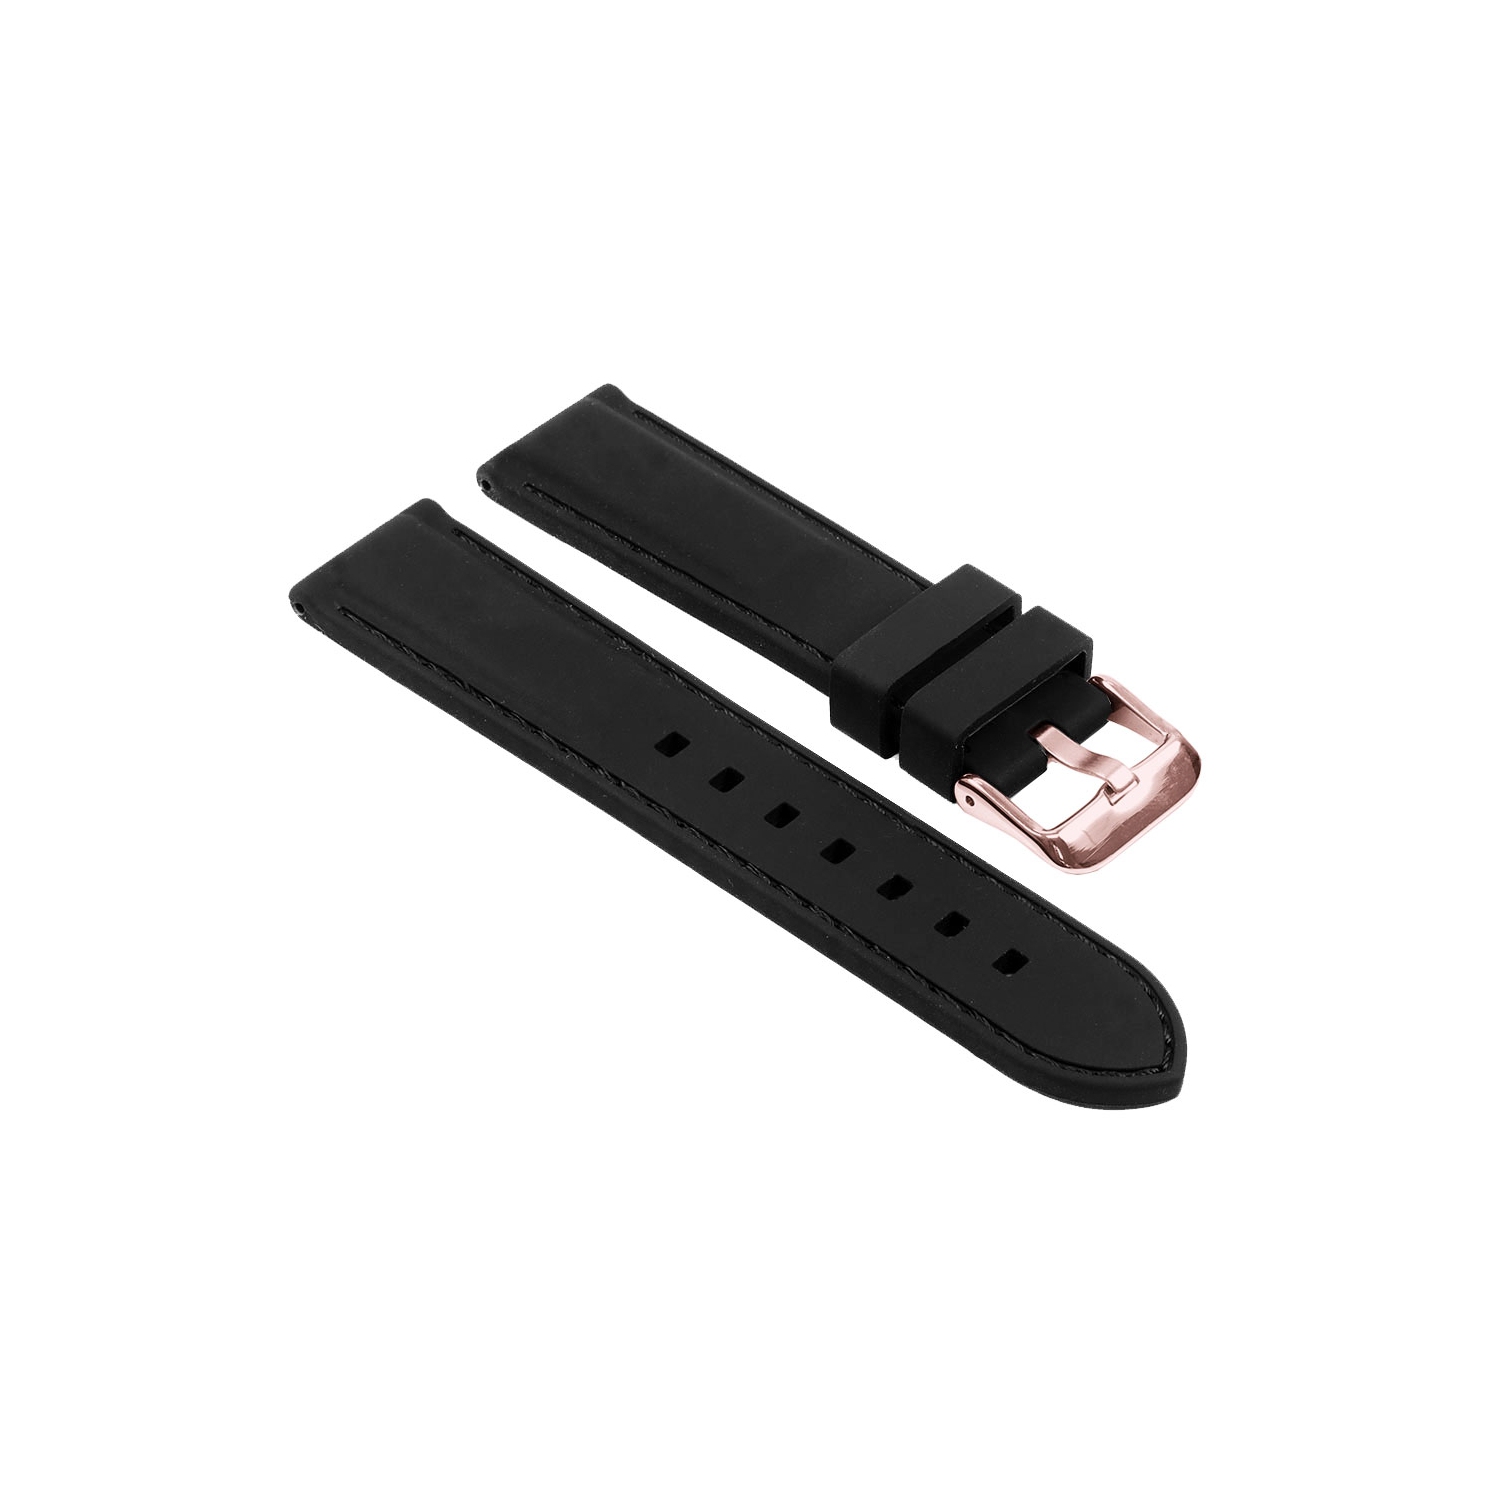 StrapsCo Silicone Rubber Watch Band Strap with Stitching for Michael Kors MKGO Watch - Black (Rose Gold Buckle)